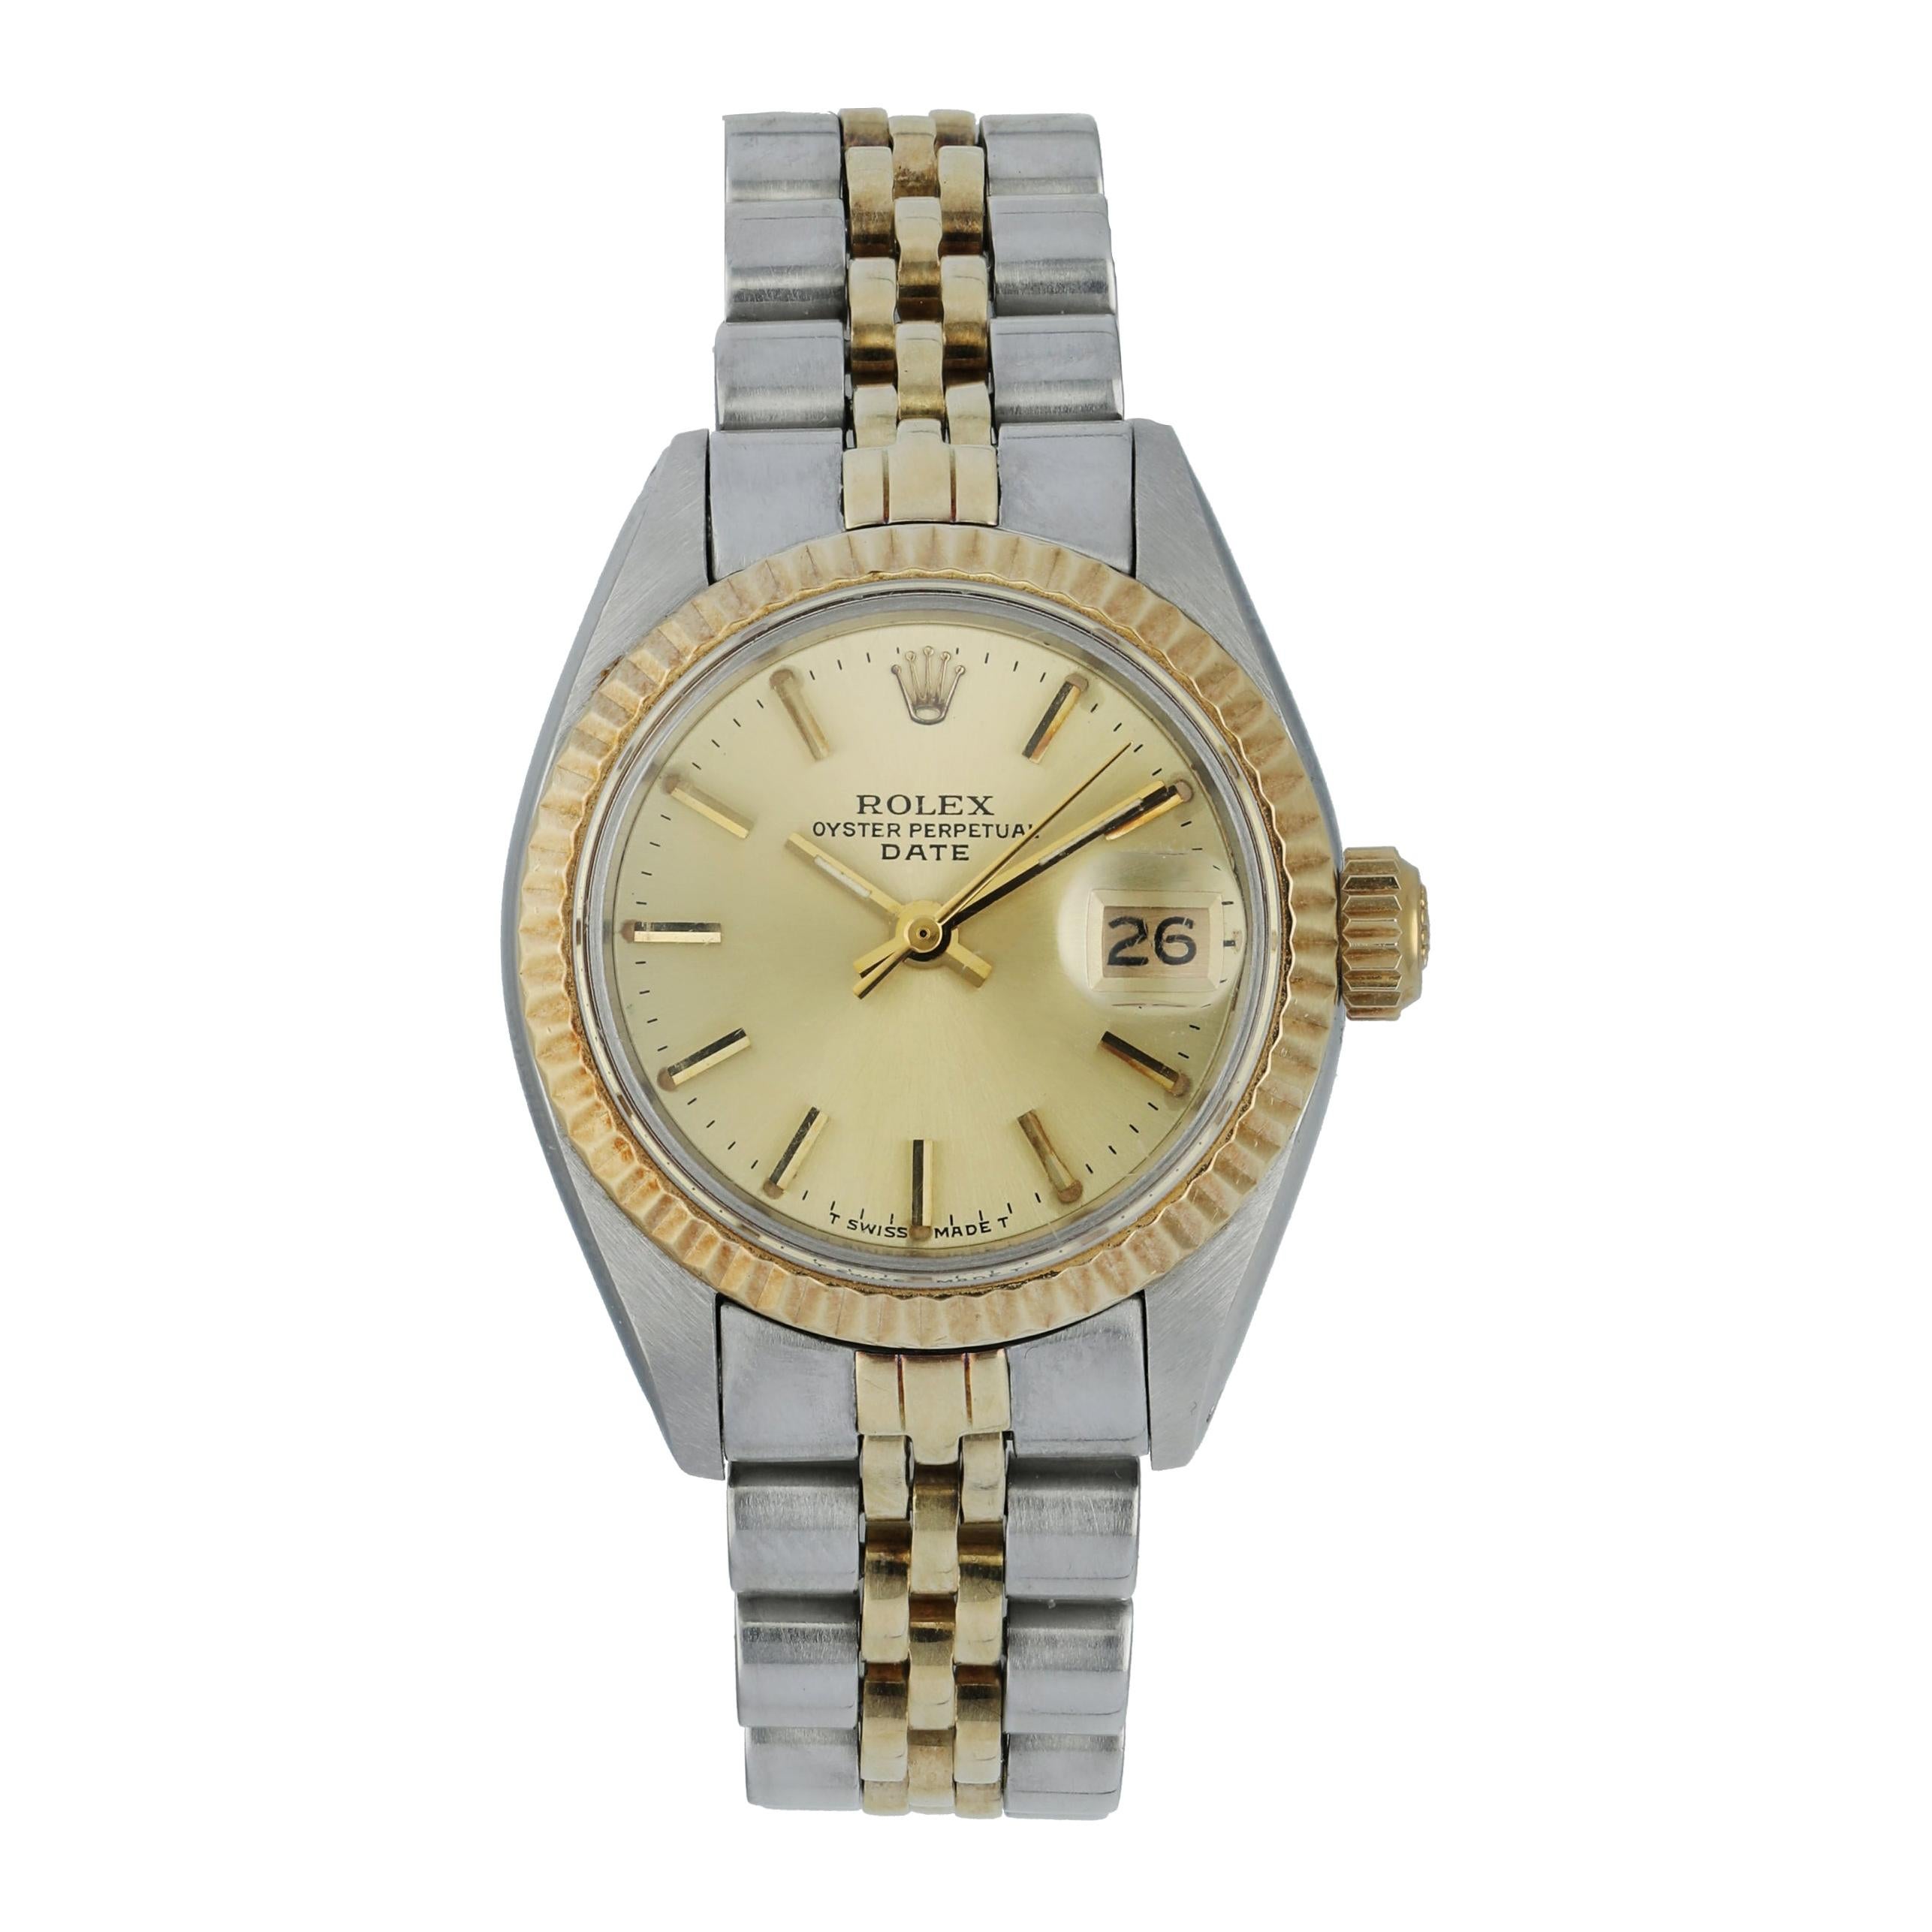 Rolex Oyster Perpetual Date 6917 Ladies Watch For Sale